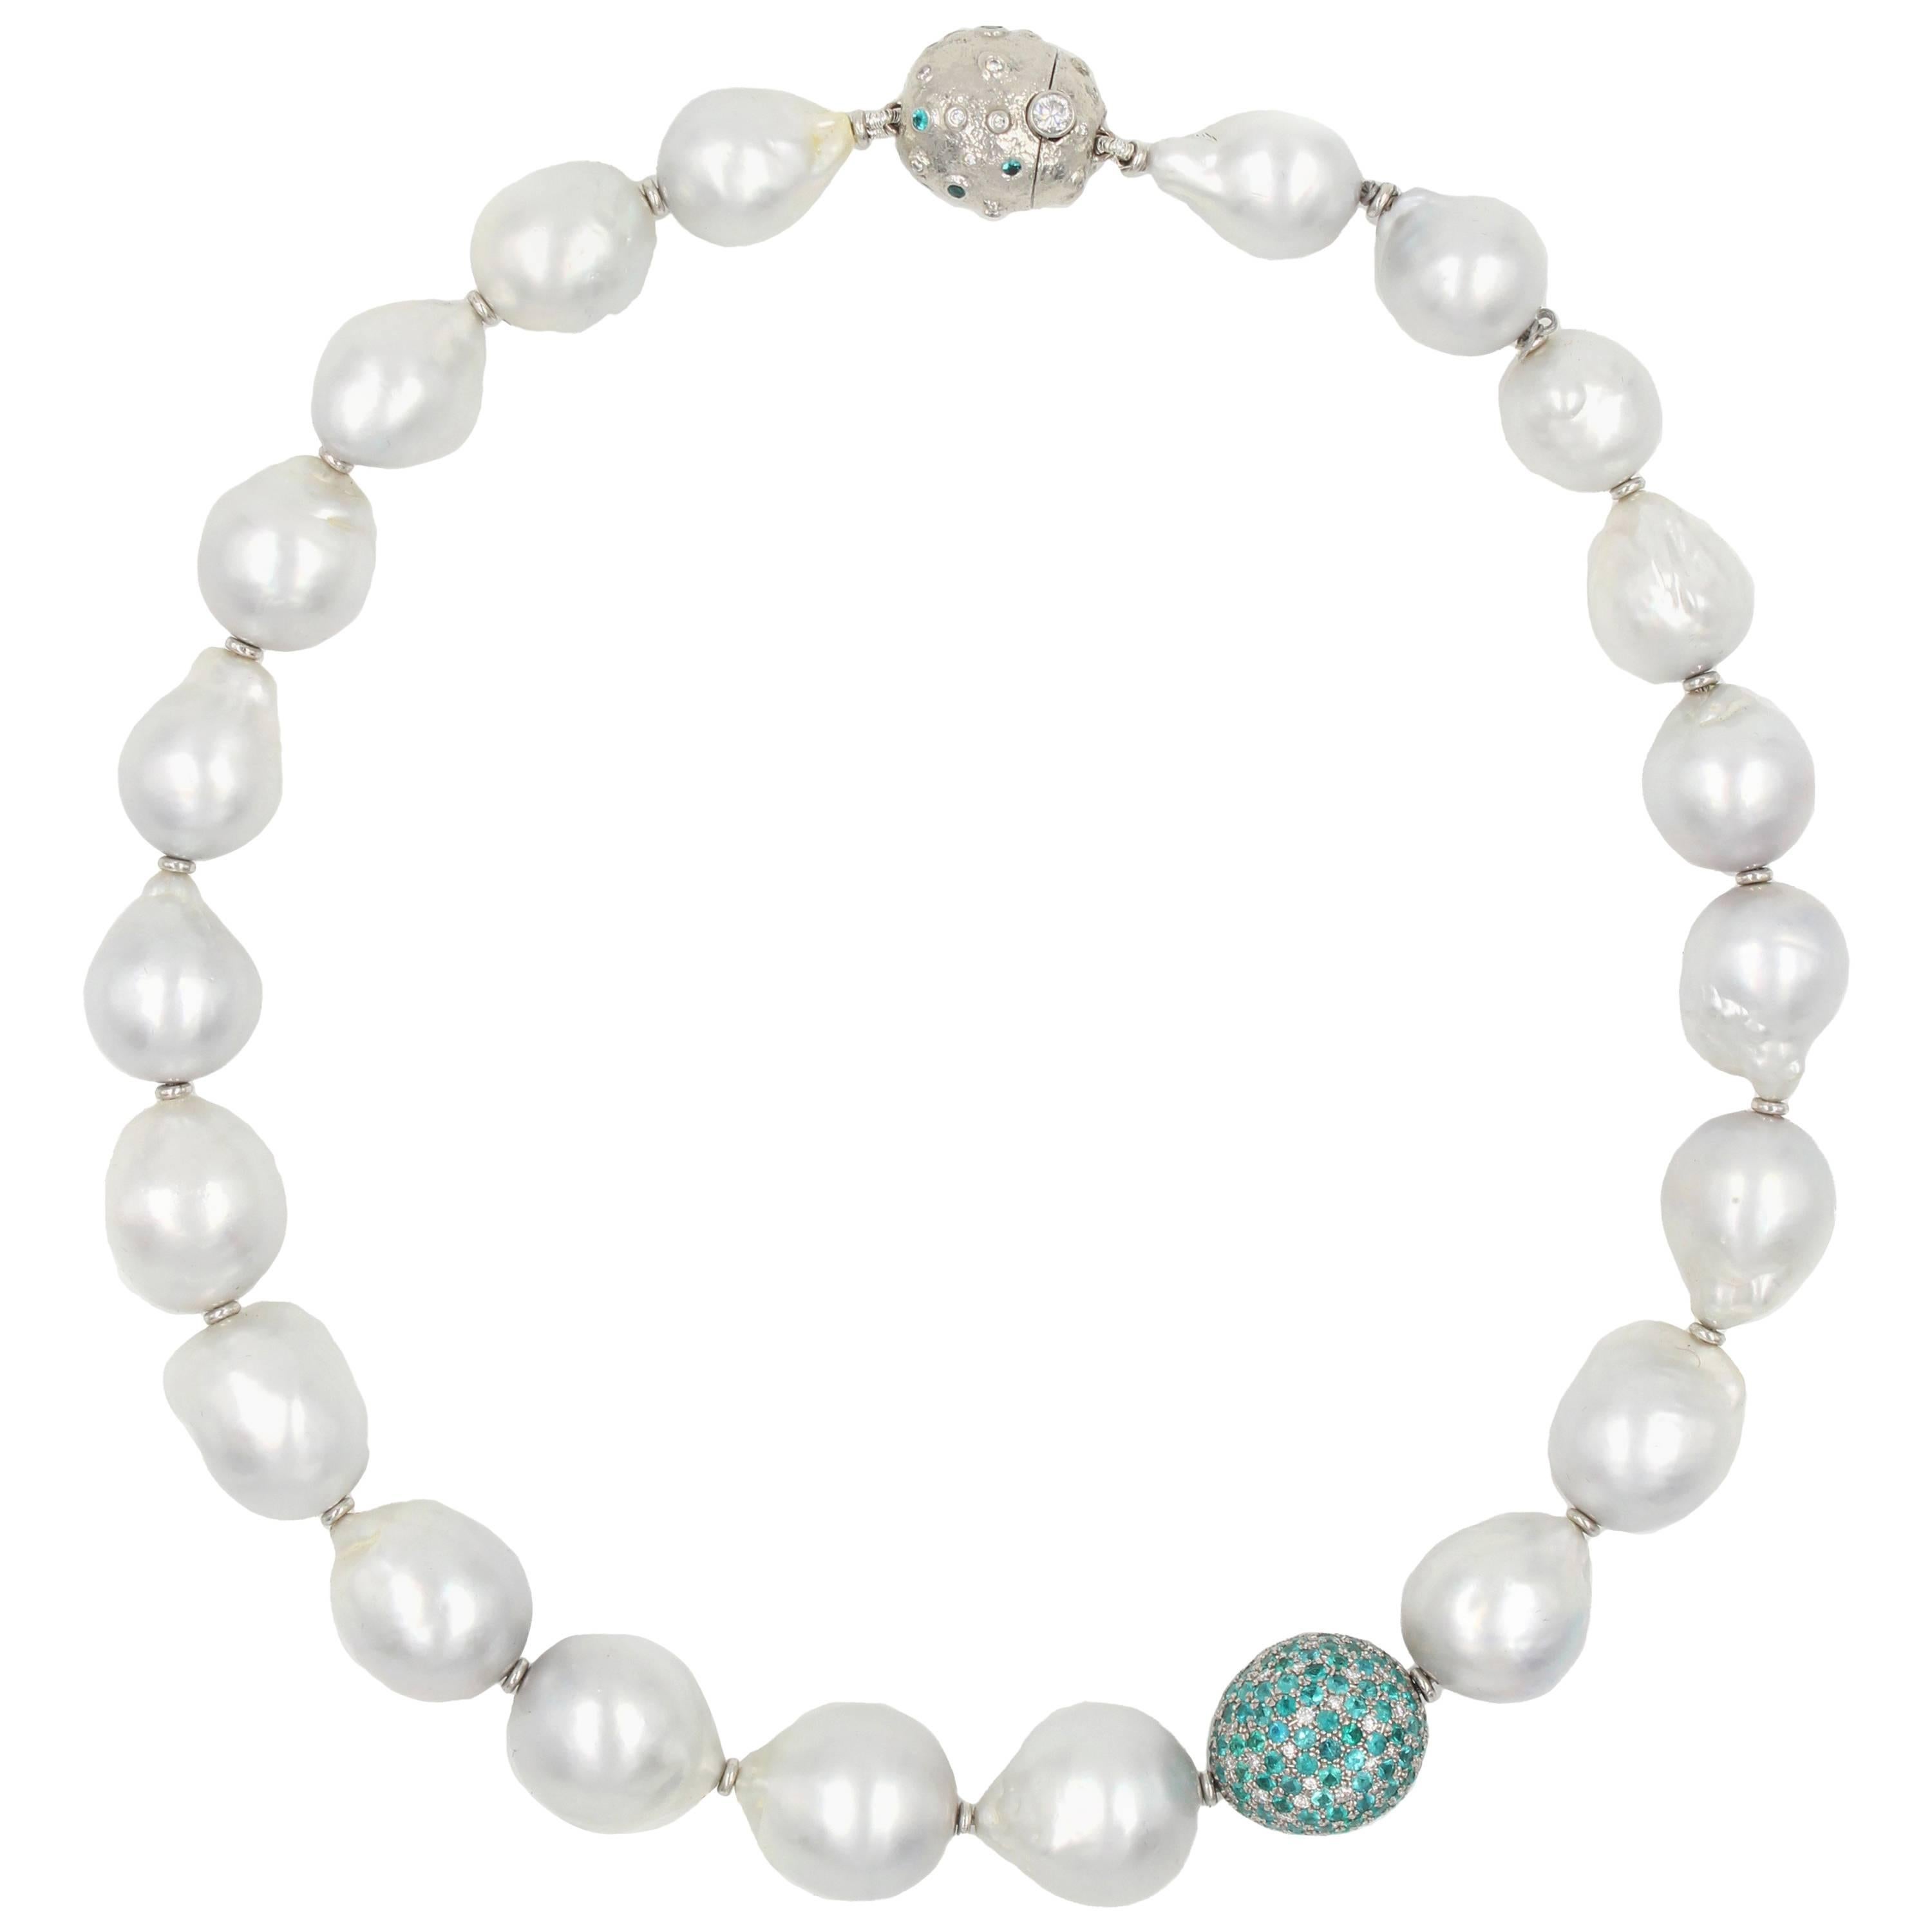 The Spectacular Necklace with South Sea Pearls, Paraiba Tourmalines, Diamonds For Sale